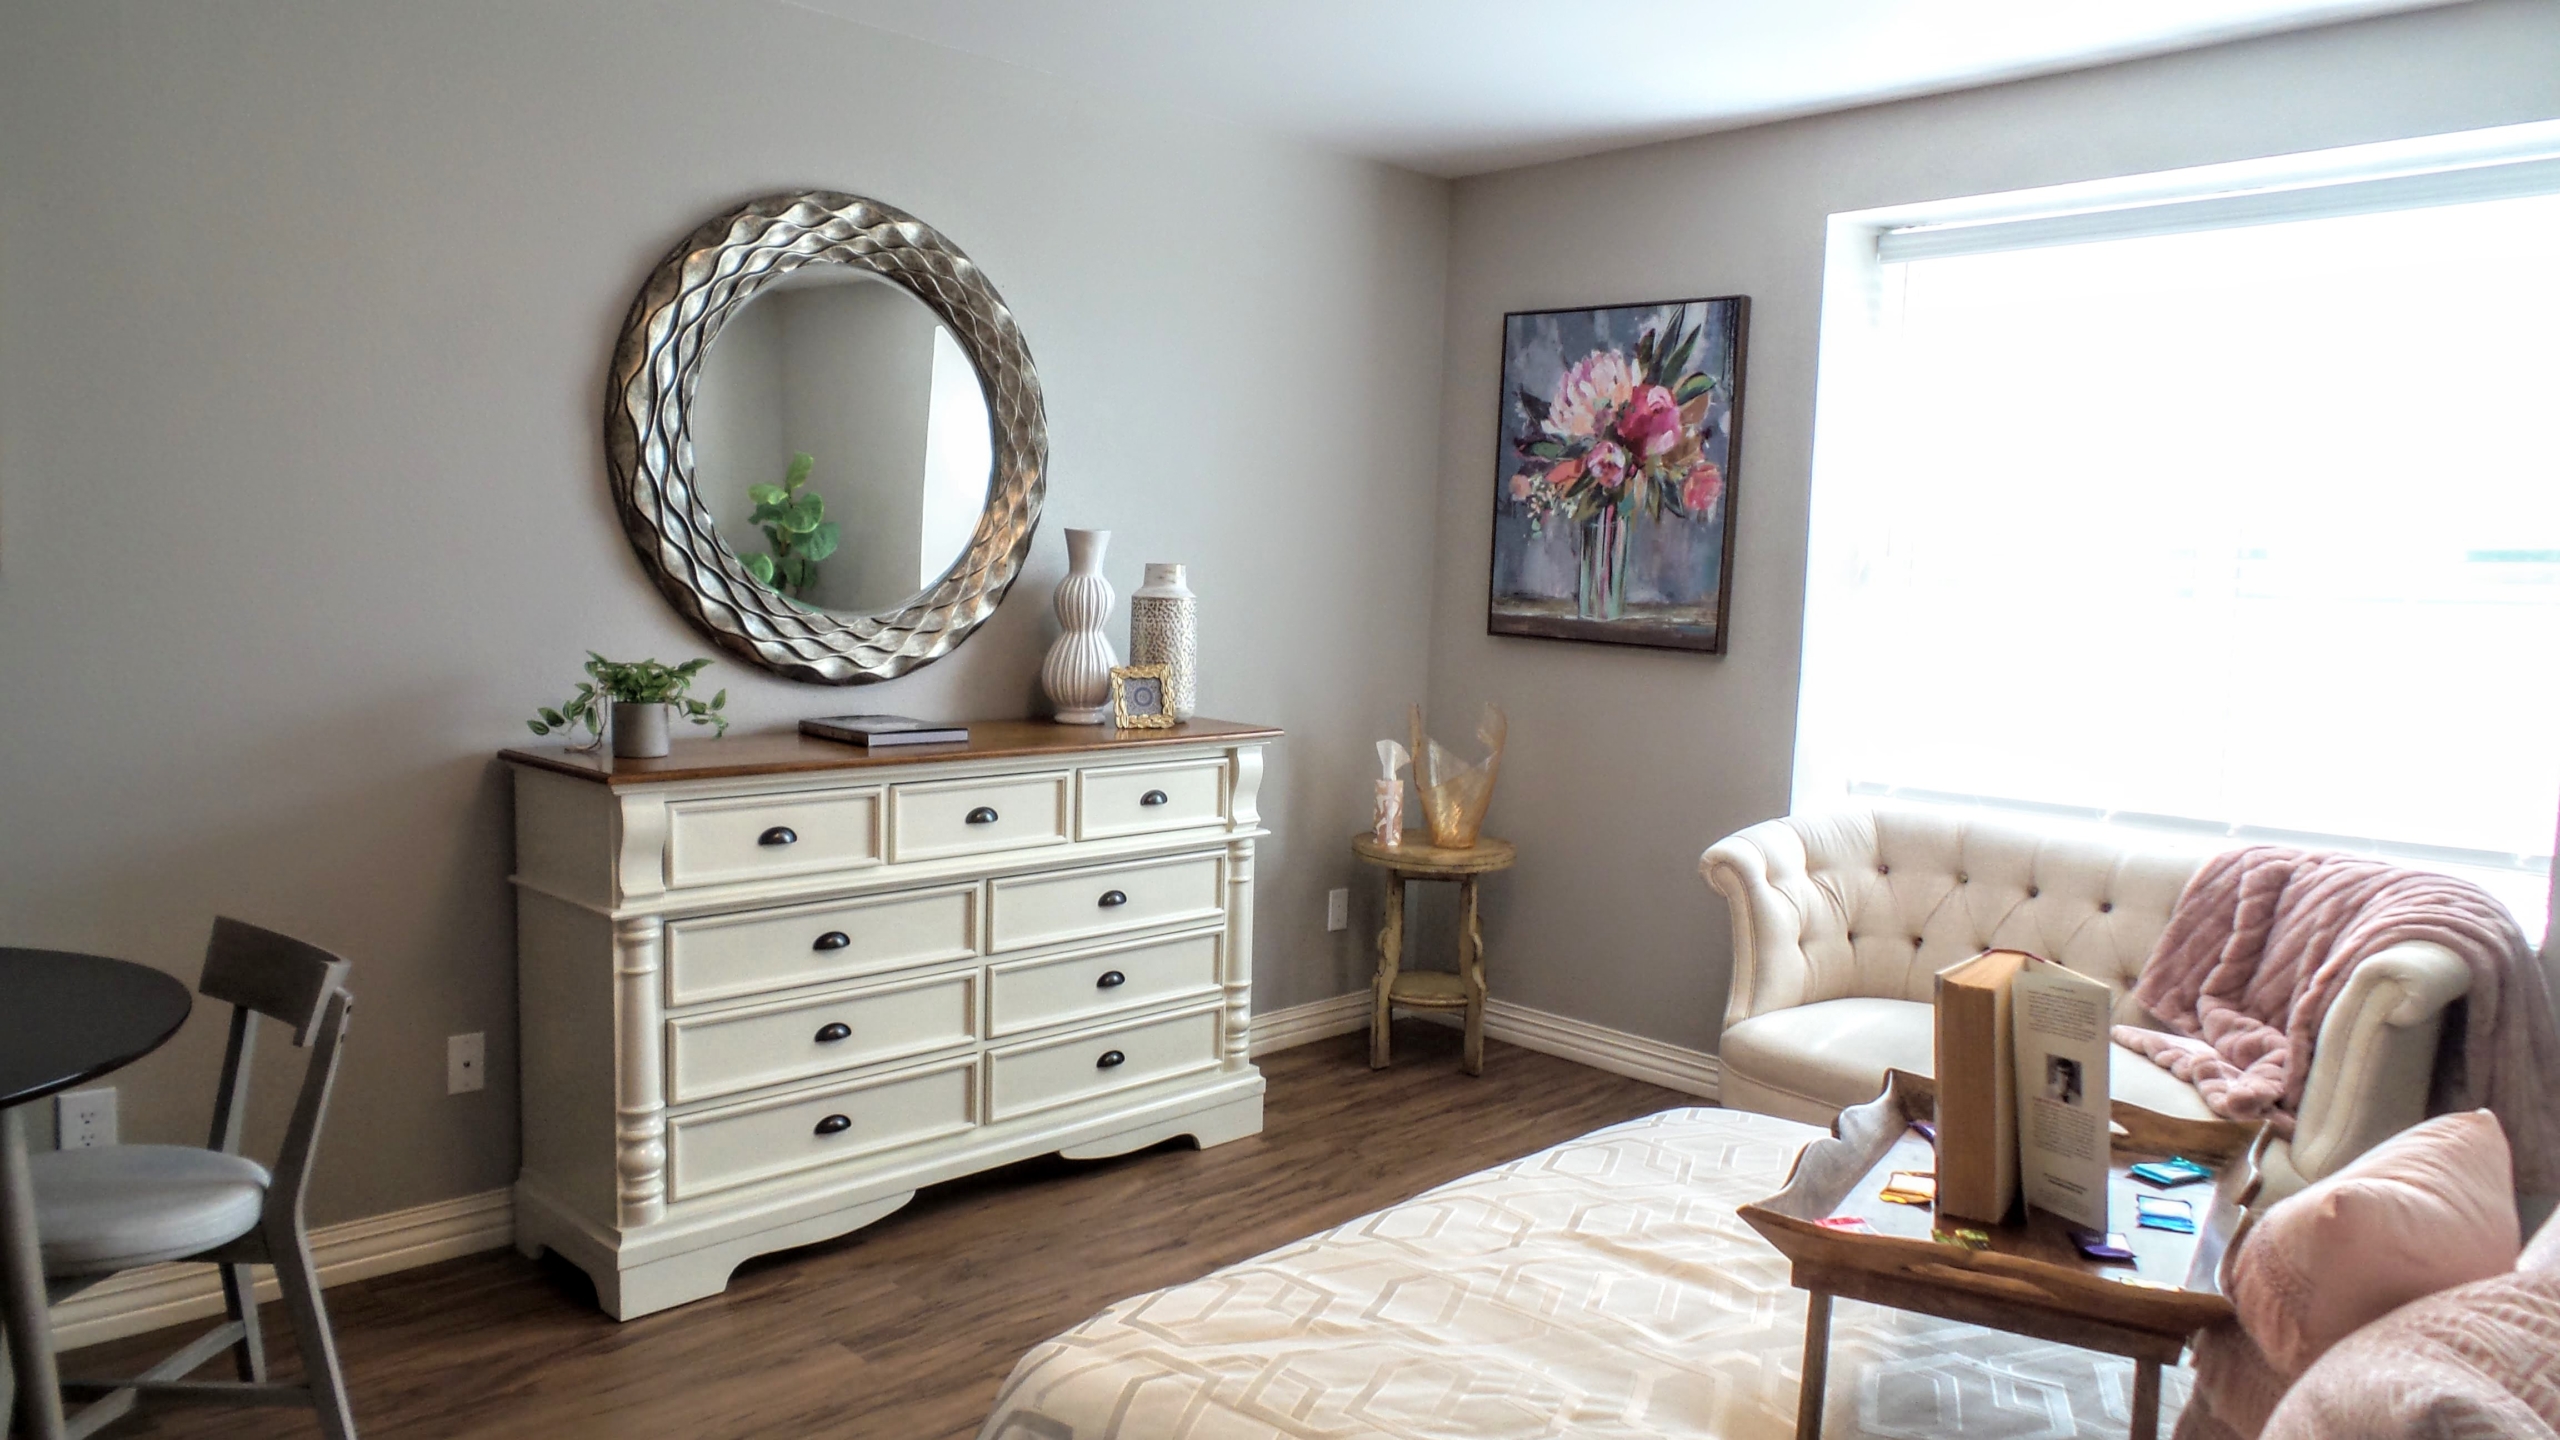 A bedroom with a dresser and chair in it